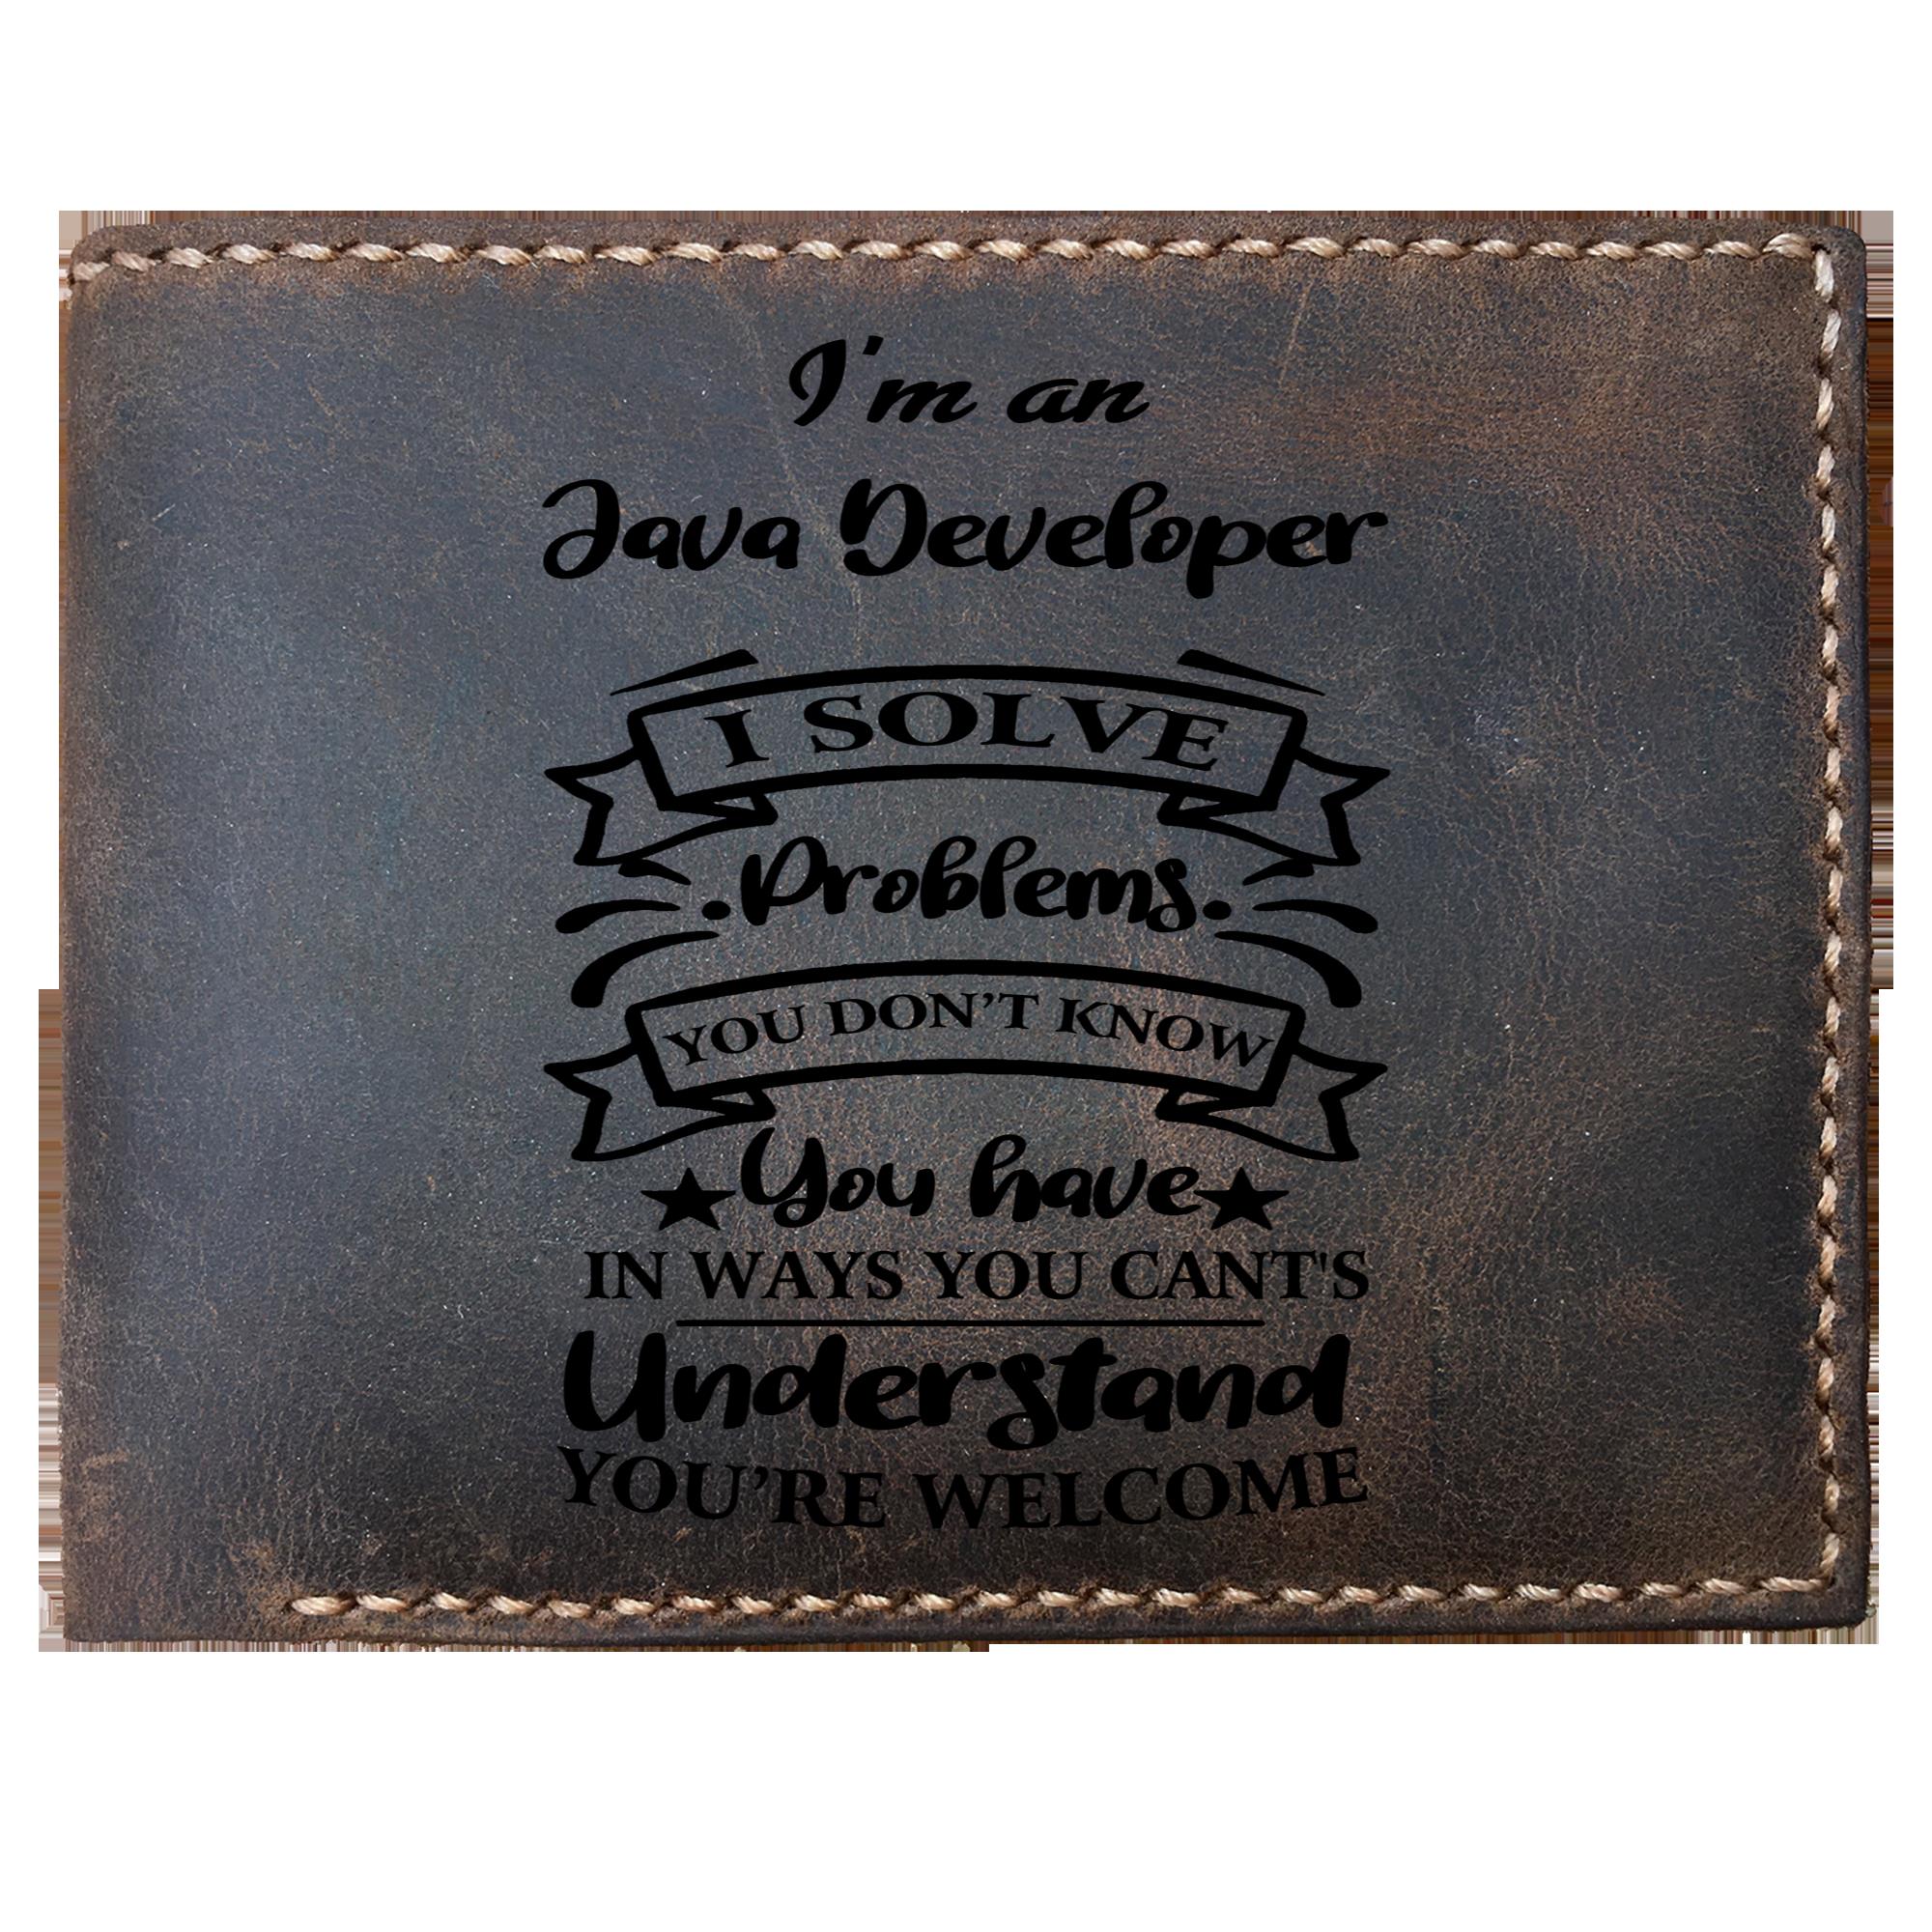 Skitongifts Funny Custom Laser Engraved Bifold Leather Wallet For Men, I'm an Java Developer Solve Problems, Father's Day Gifts